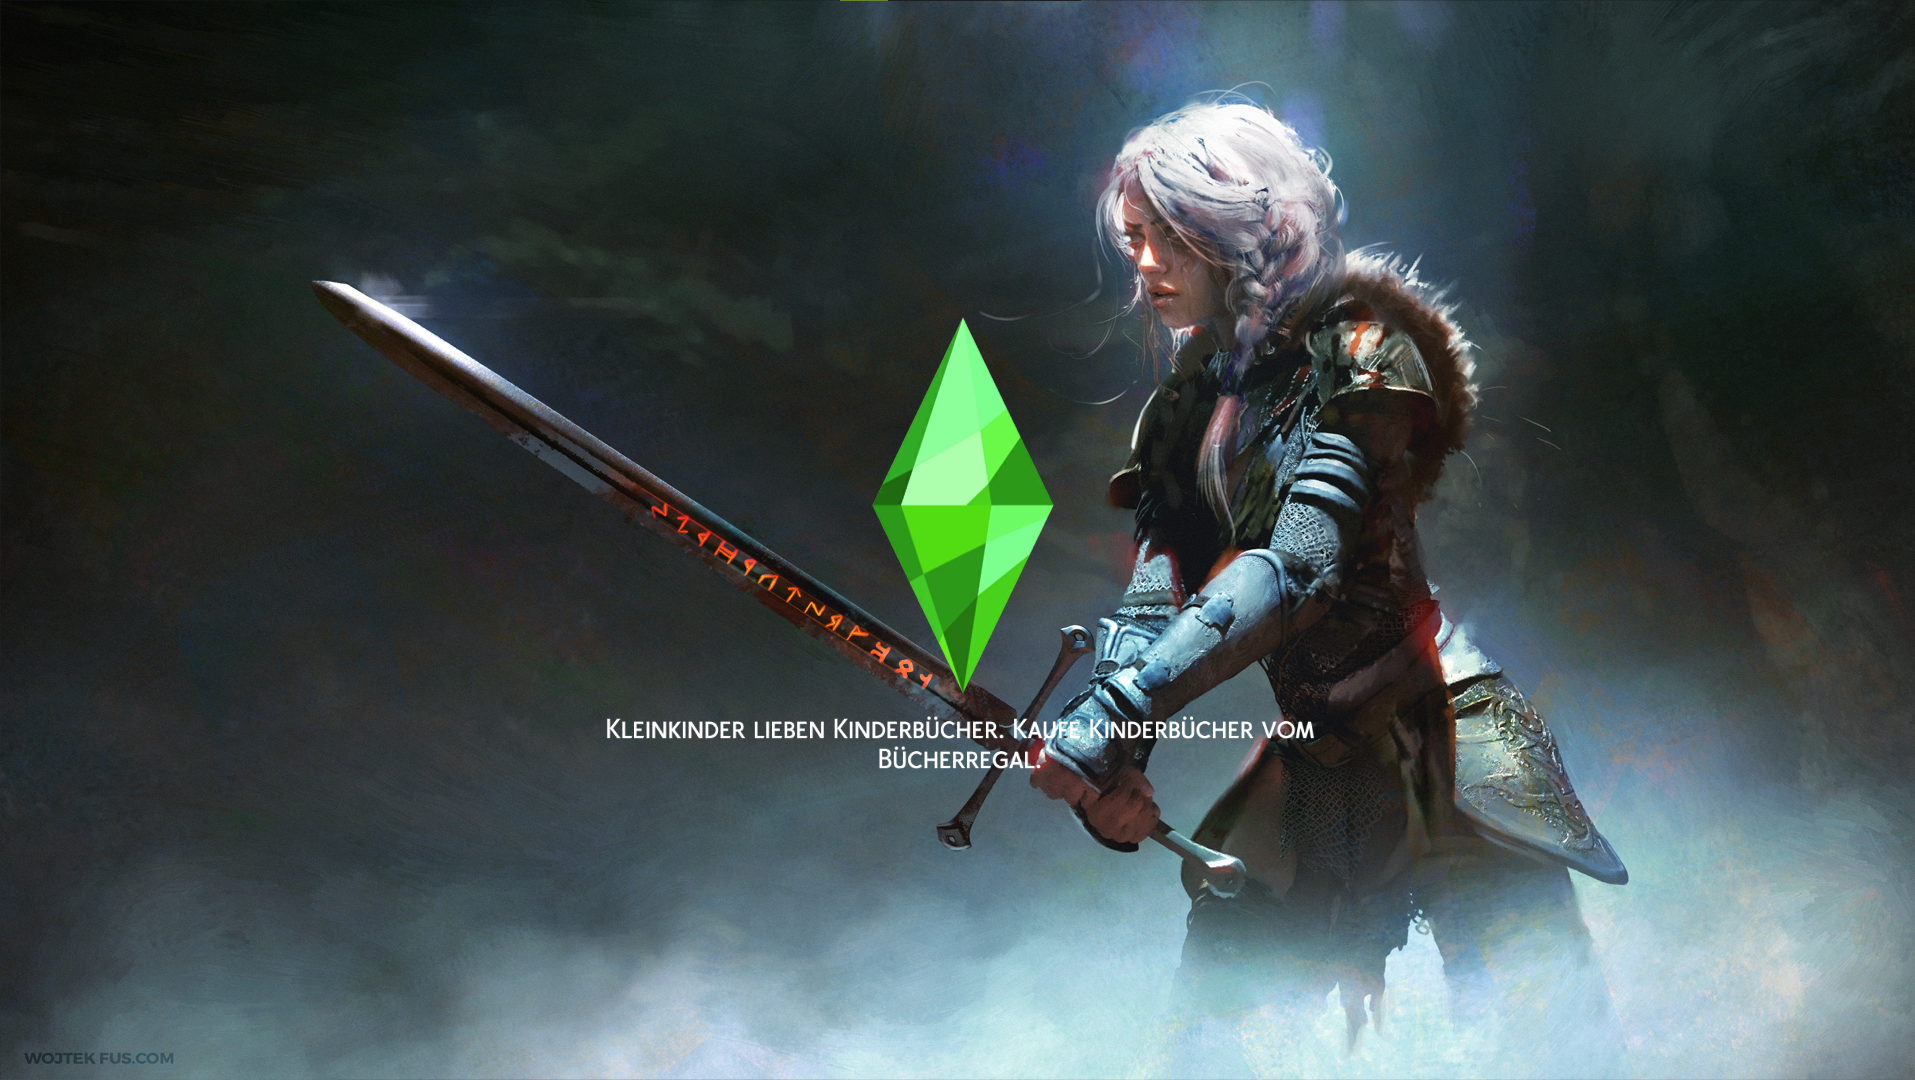 The Witcher 2 - Loading Screen - The Sims 4 Mods - CurseForge